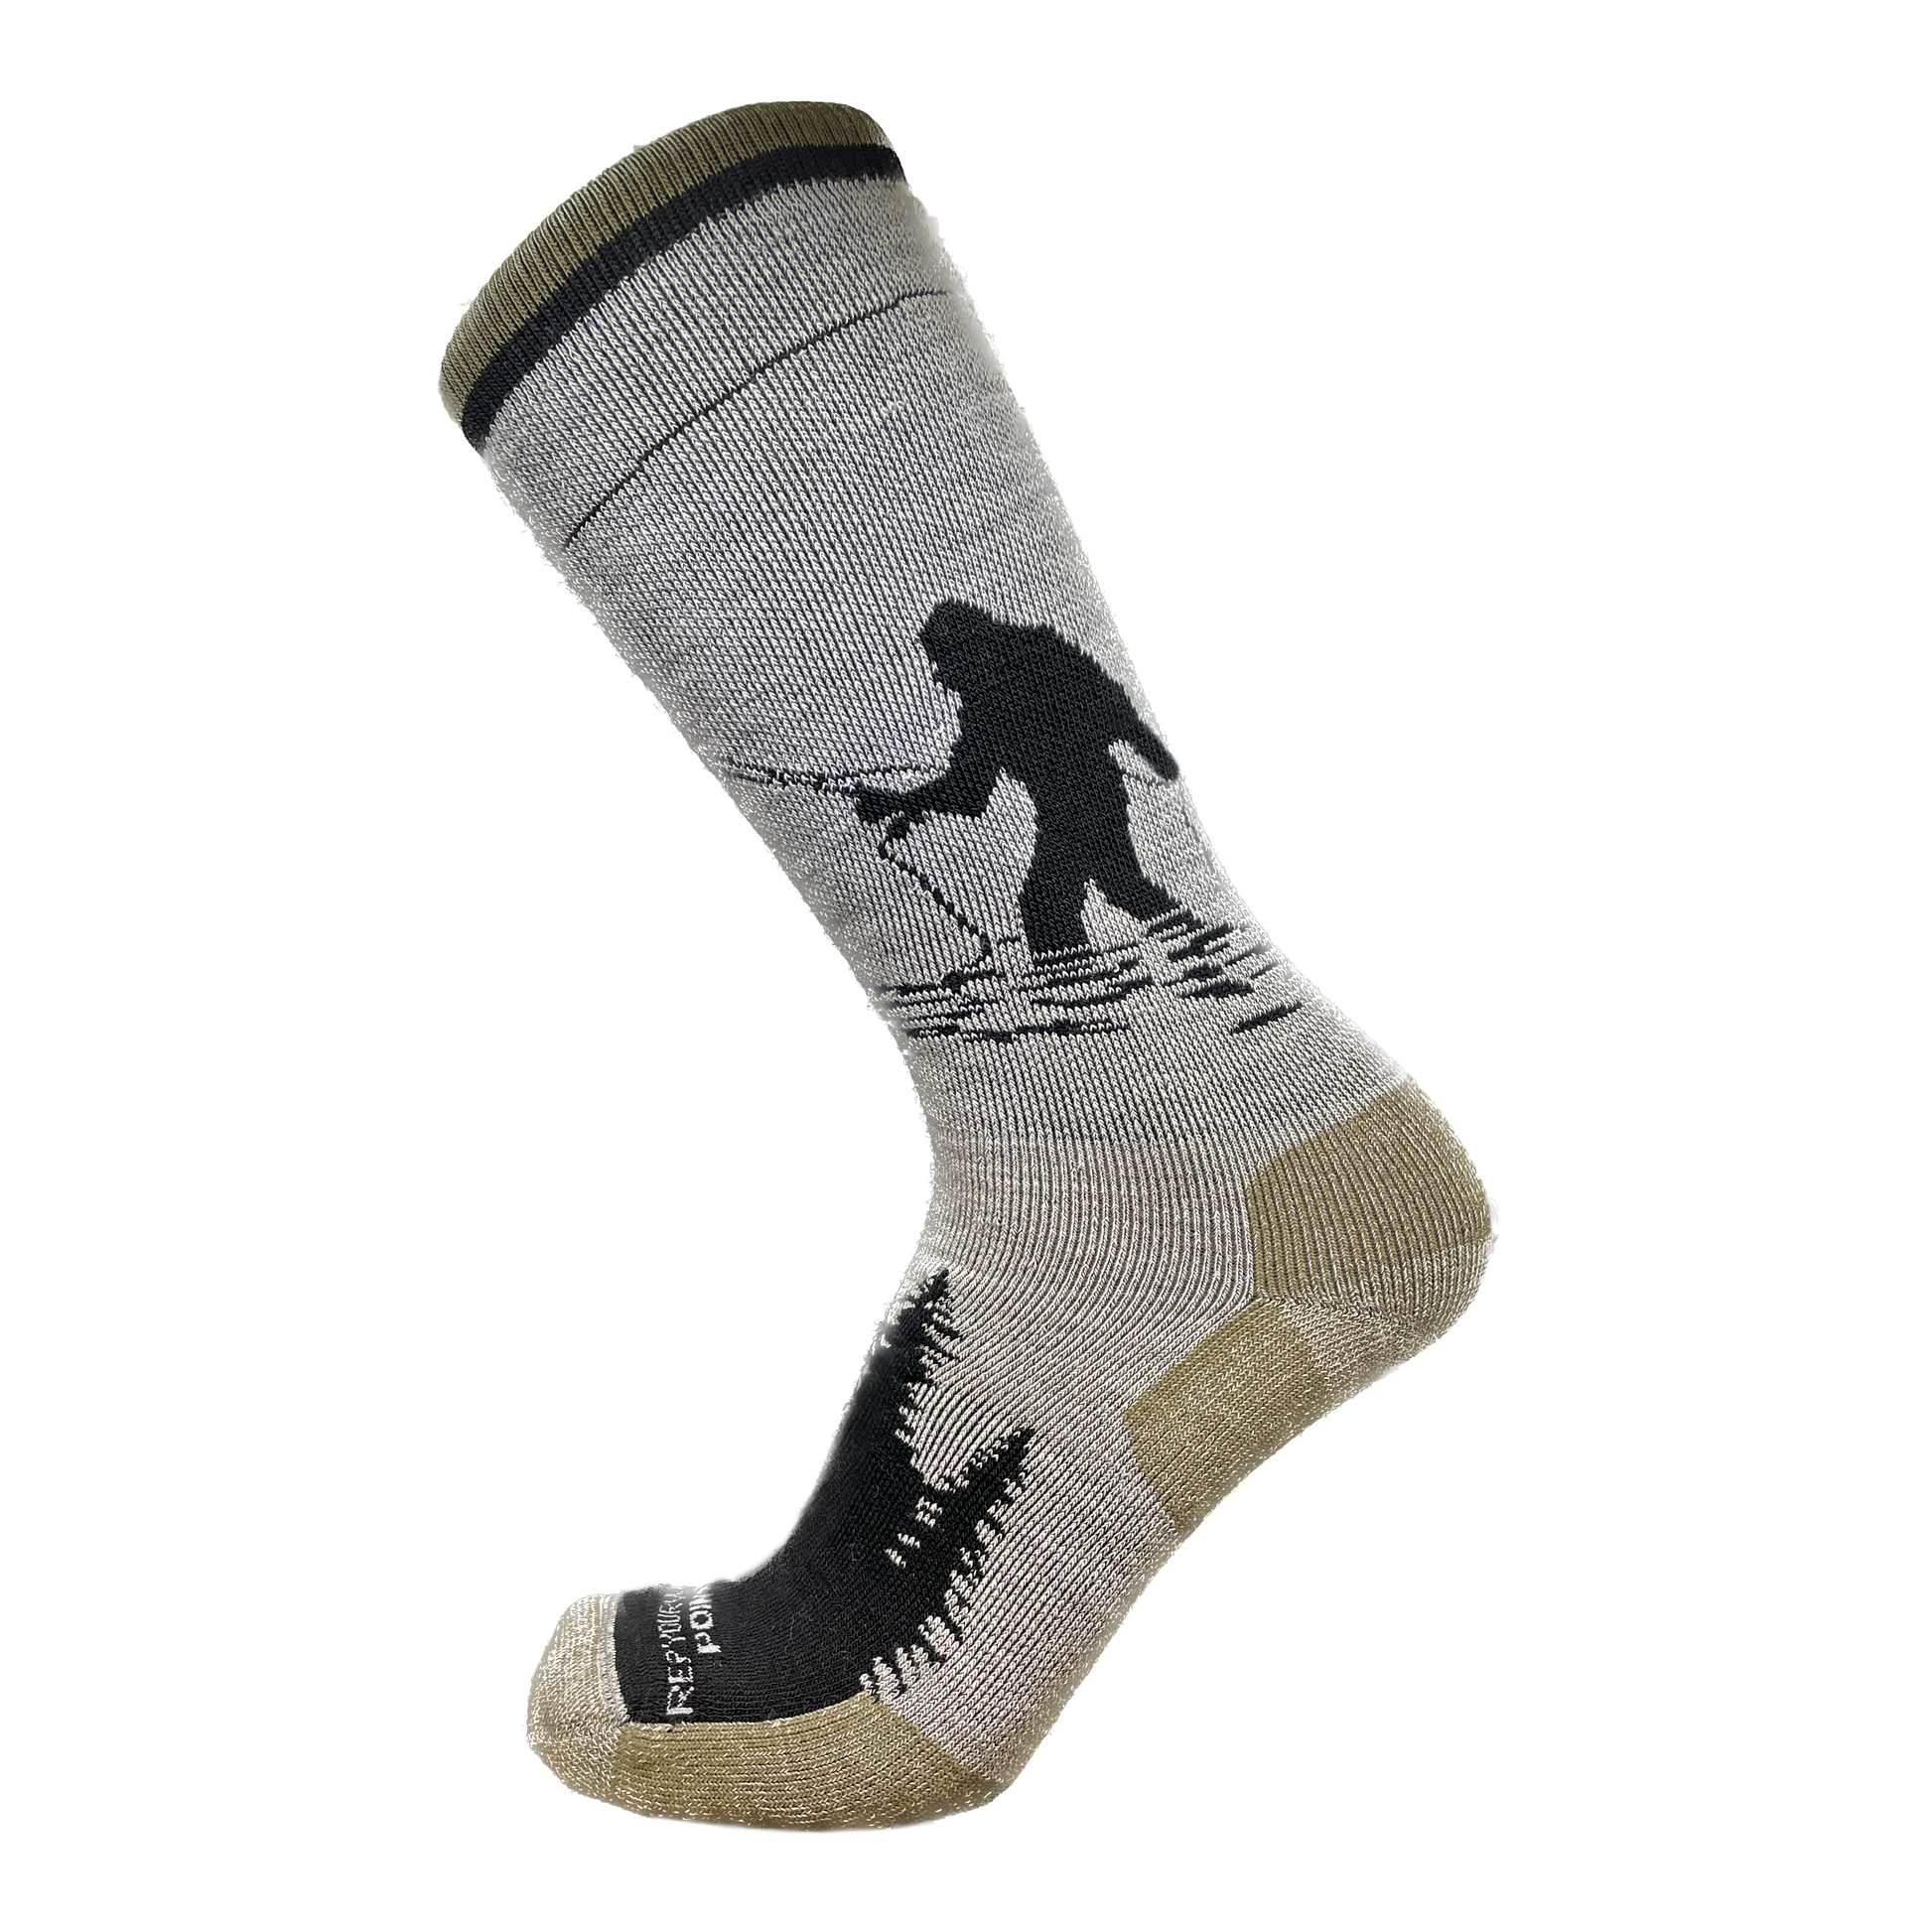 Gray socks with some light olive that show sasquatch fishing on the side. The socks have pine tree silhouette on the top of the foot and the words Rep your weater and pont 6 on the toes